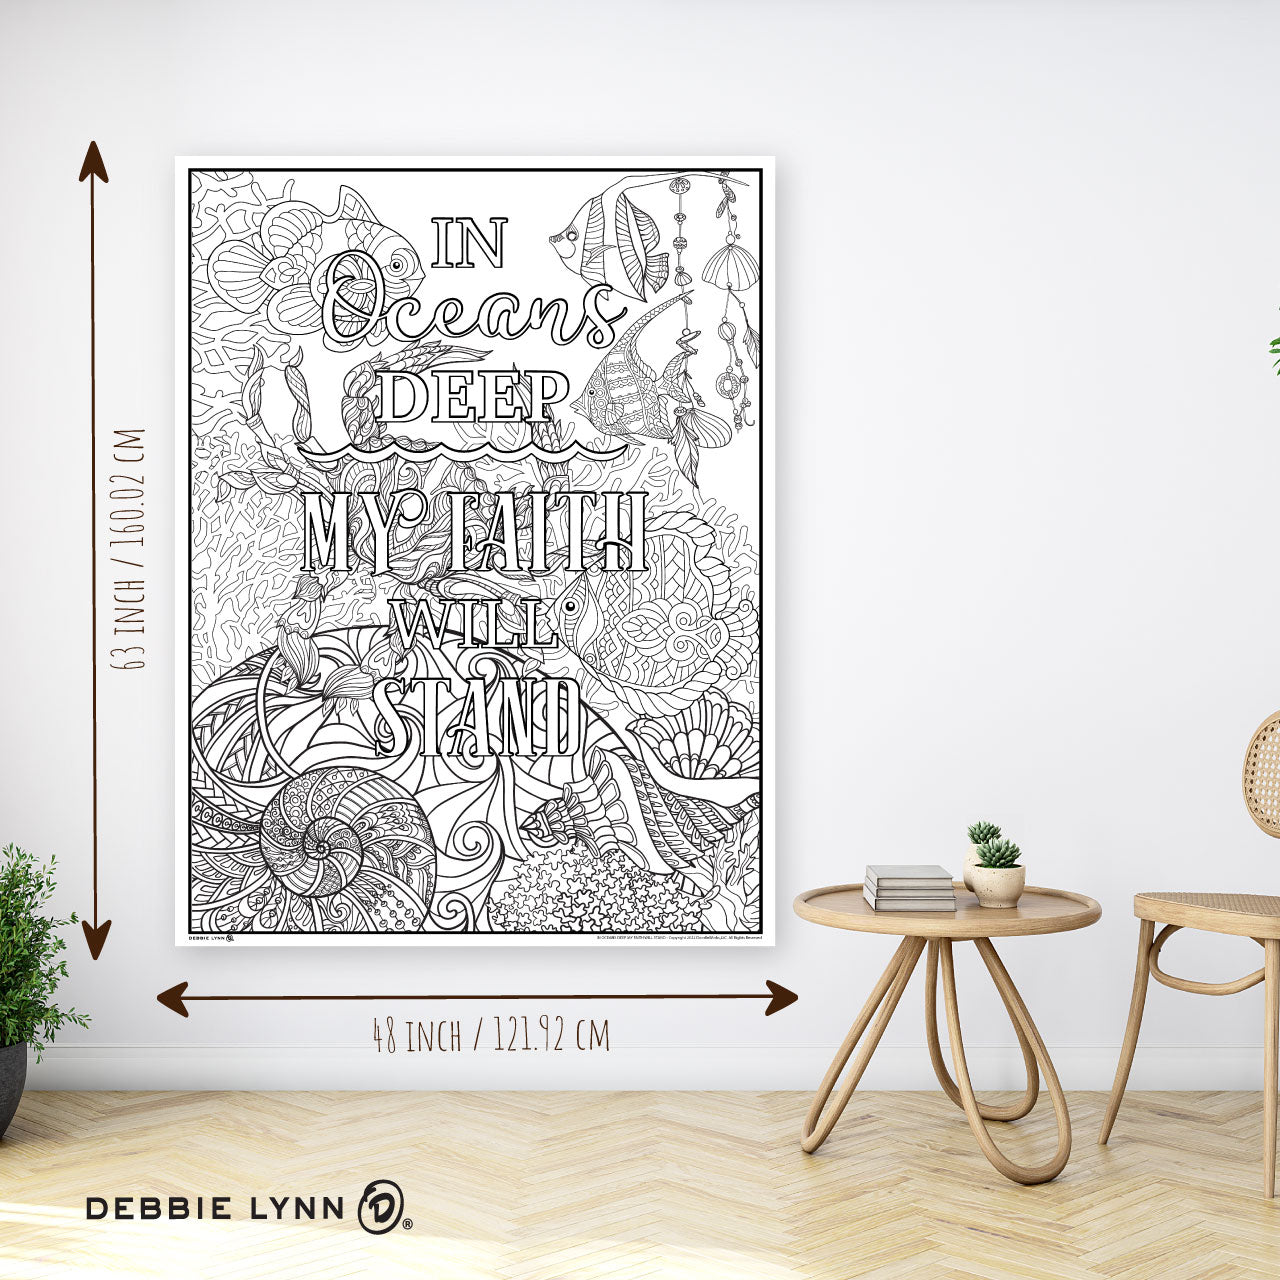 OCEANS DEEP FAITH PERSONALIZED GIANT COLORING POSTER 46"x60"